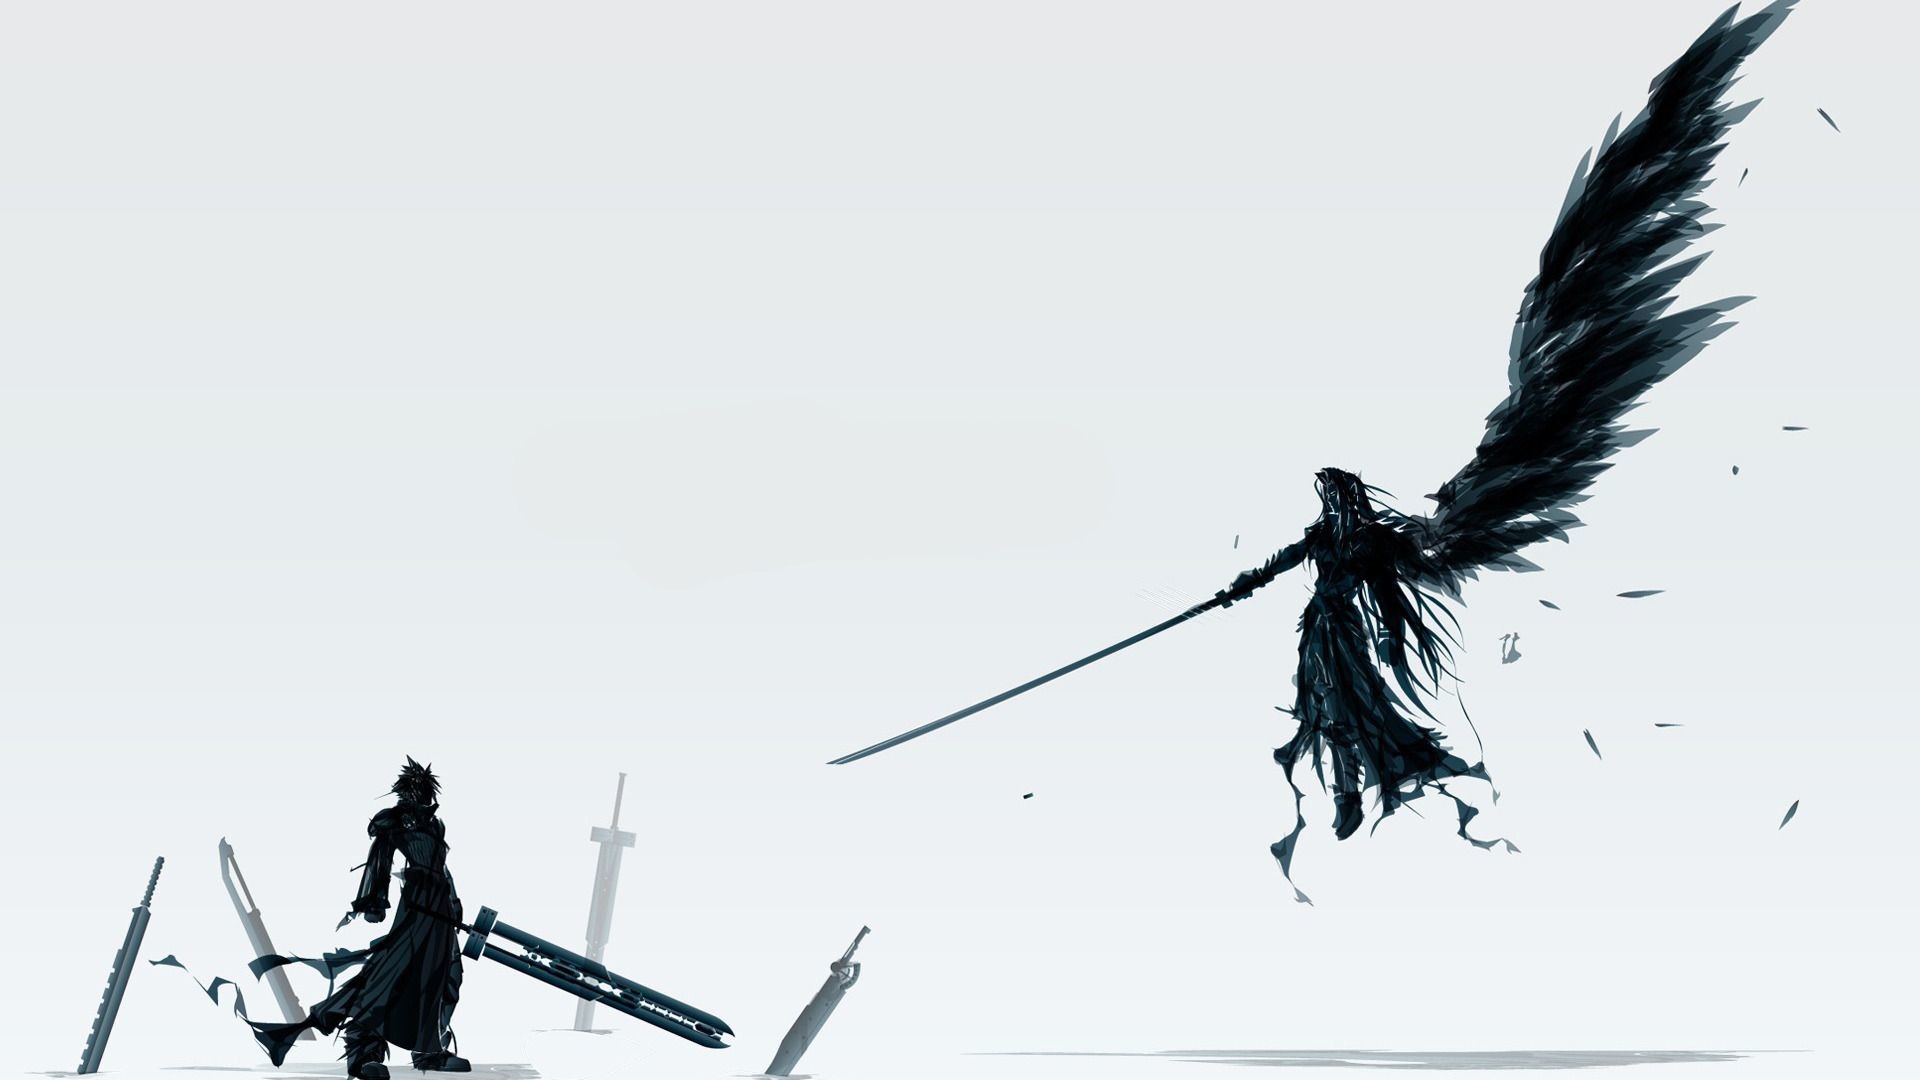 1920x1080 Collection of Final Fantasy Vii Wallpapers on HDWallpapers